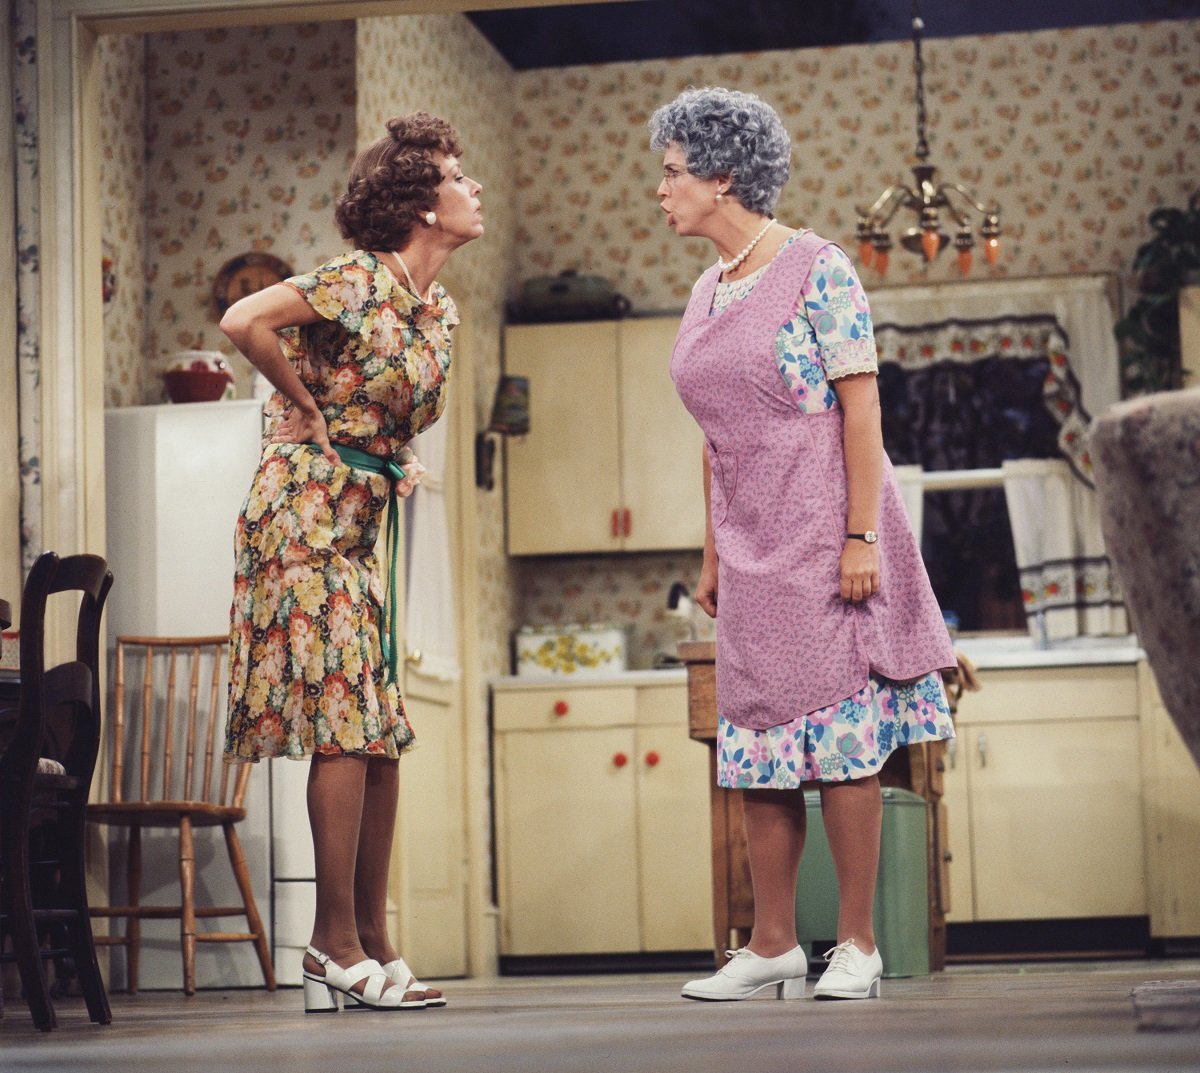 Carol Burnett wearing a green and orange floral dress, and Vicki Lawrence in a blue floral dress and purple apron film a scene for 'Mama's Family.'